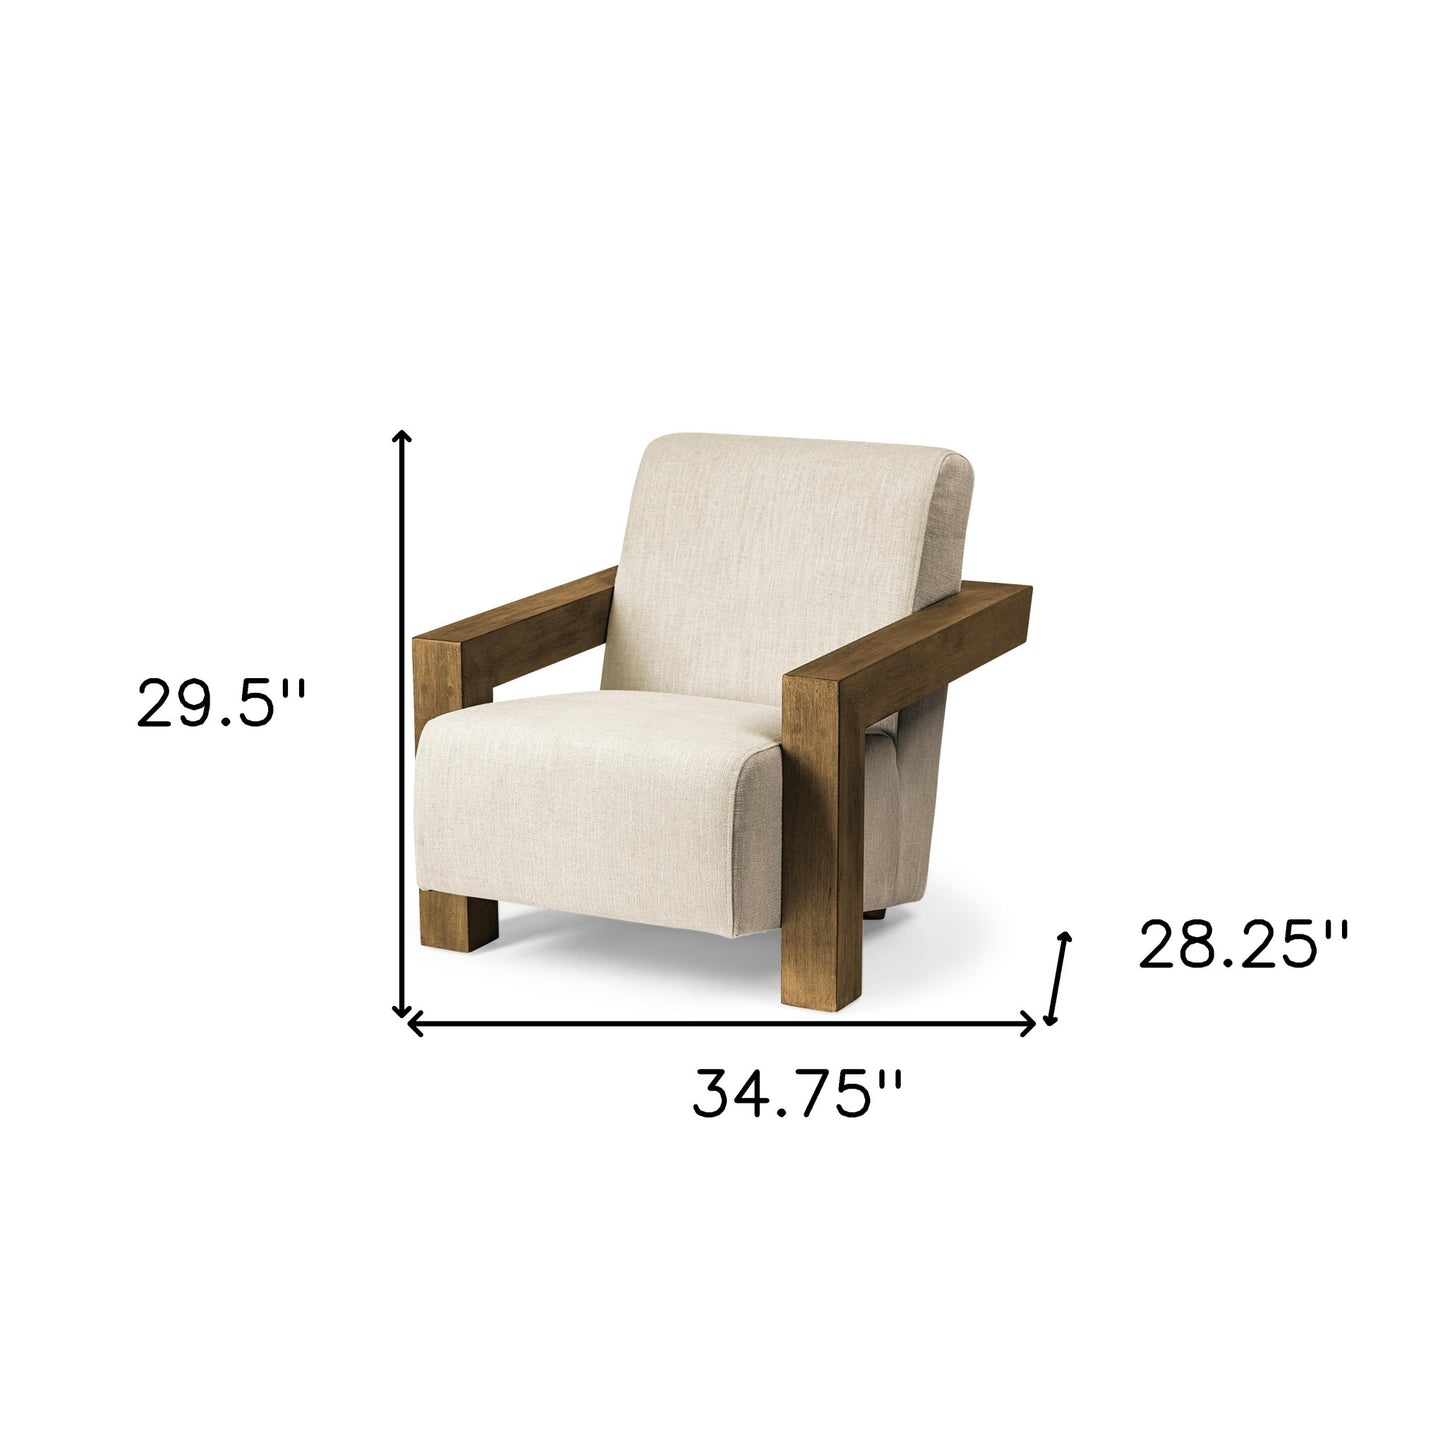 35" Cream And Brown Fabric Lounge Chair